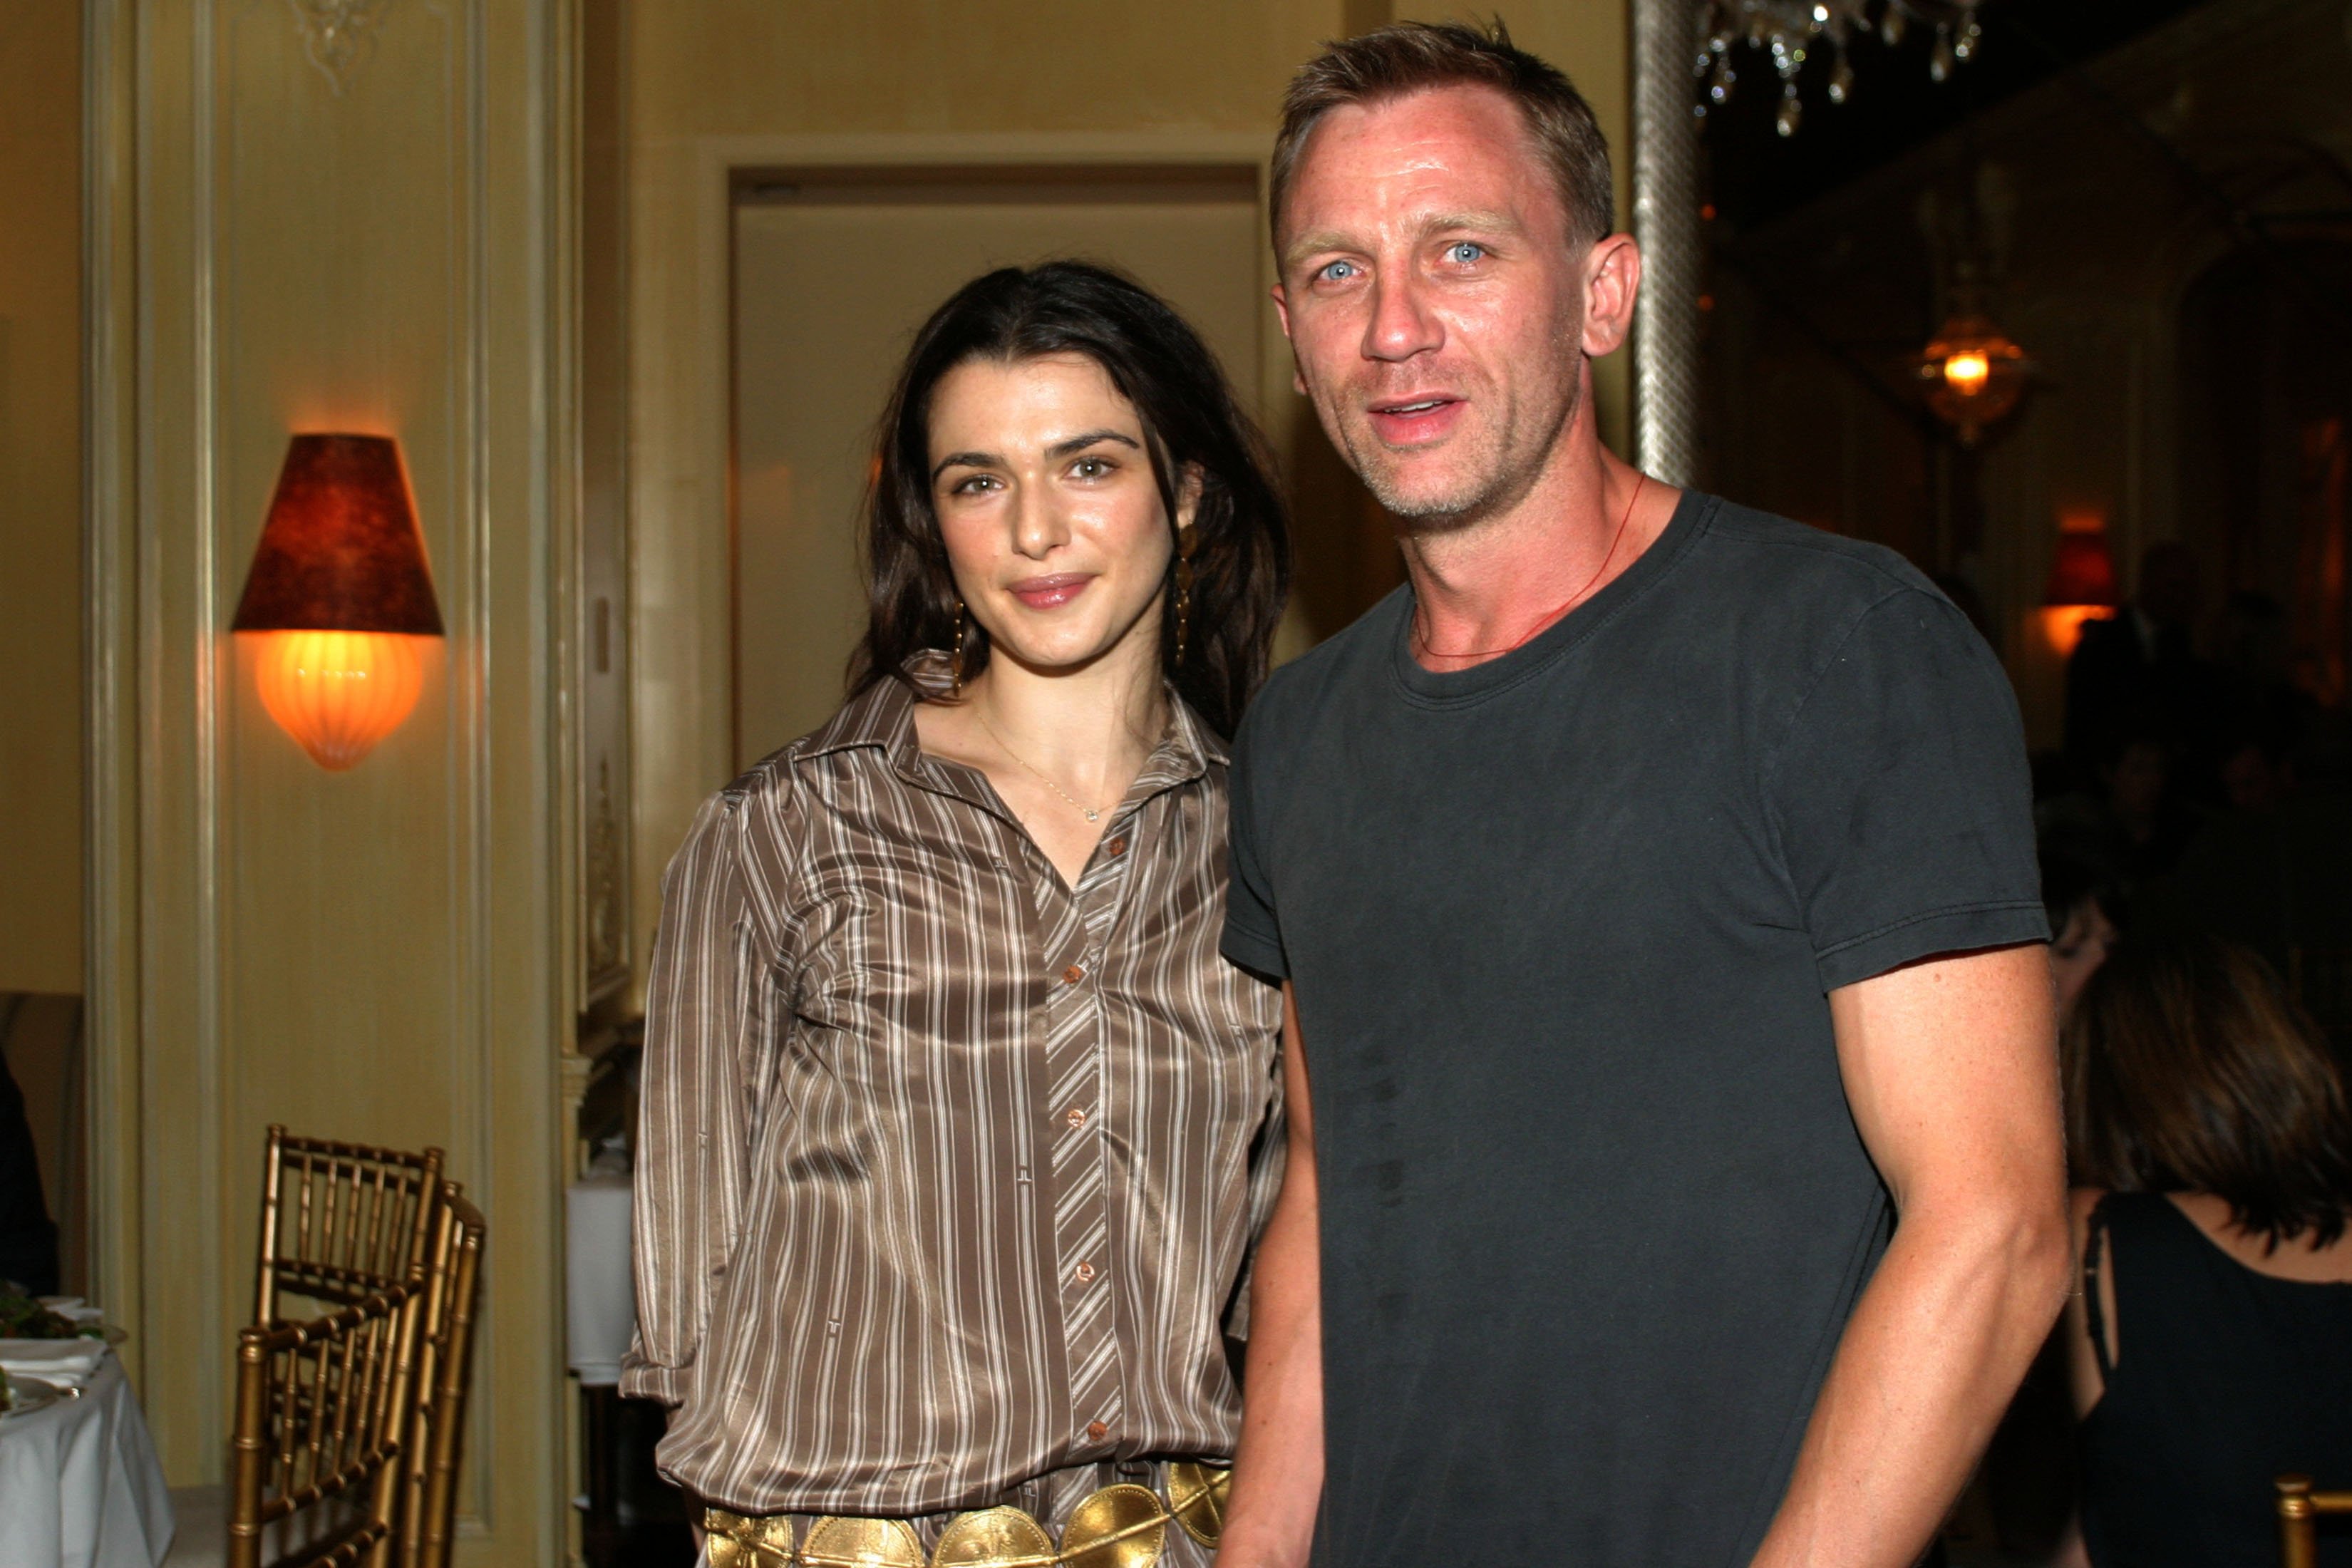 Rachel Weisz and Daniel Craig attend a private screening of "Enduring Love" at the MGM screening room on September 13, 2004, in New York City. | Source: Getty Images